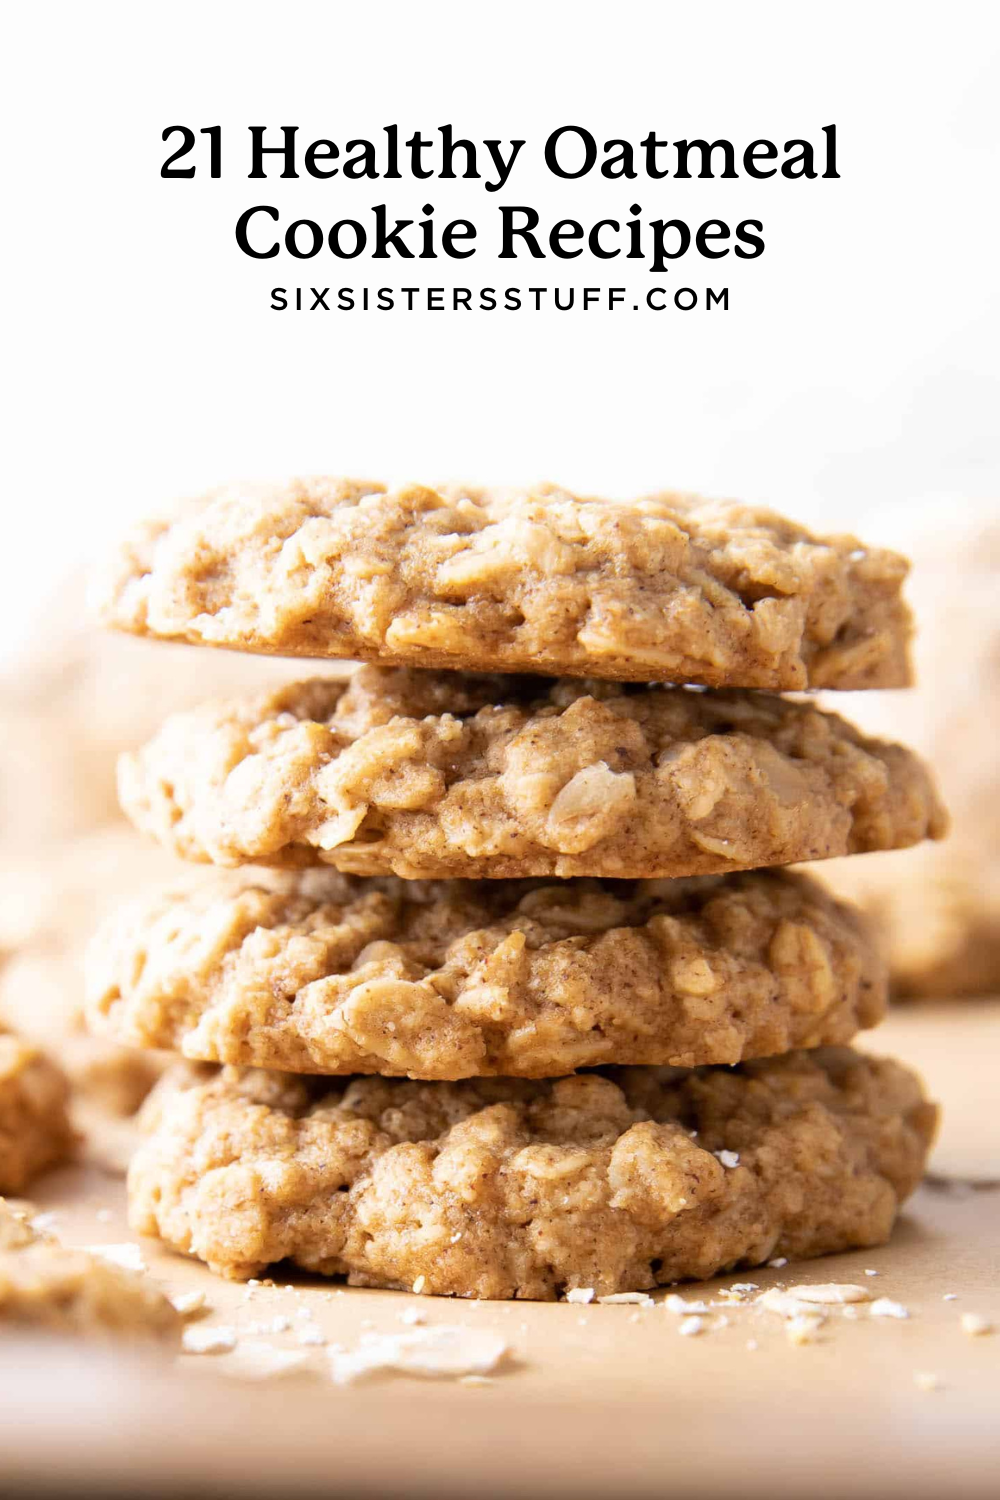 21 Healthy Oatmeal Cookies Recipes